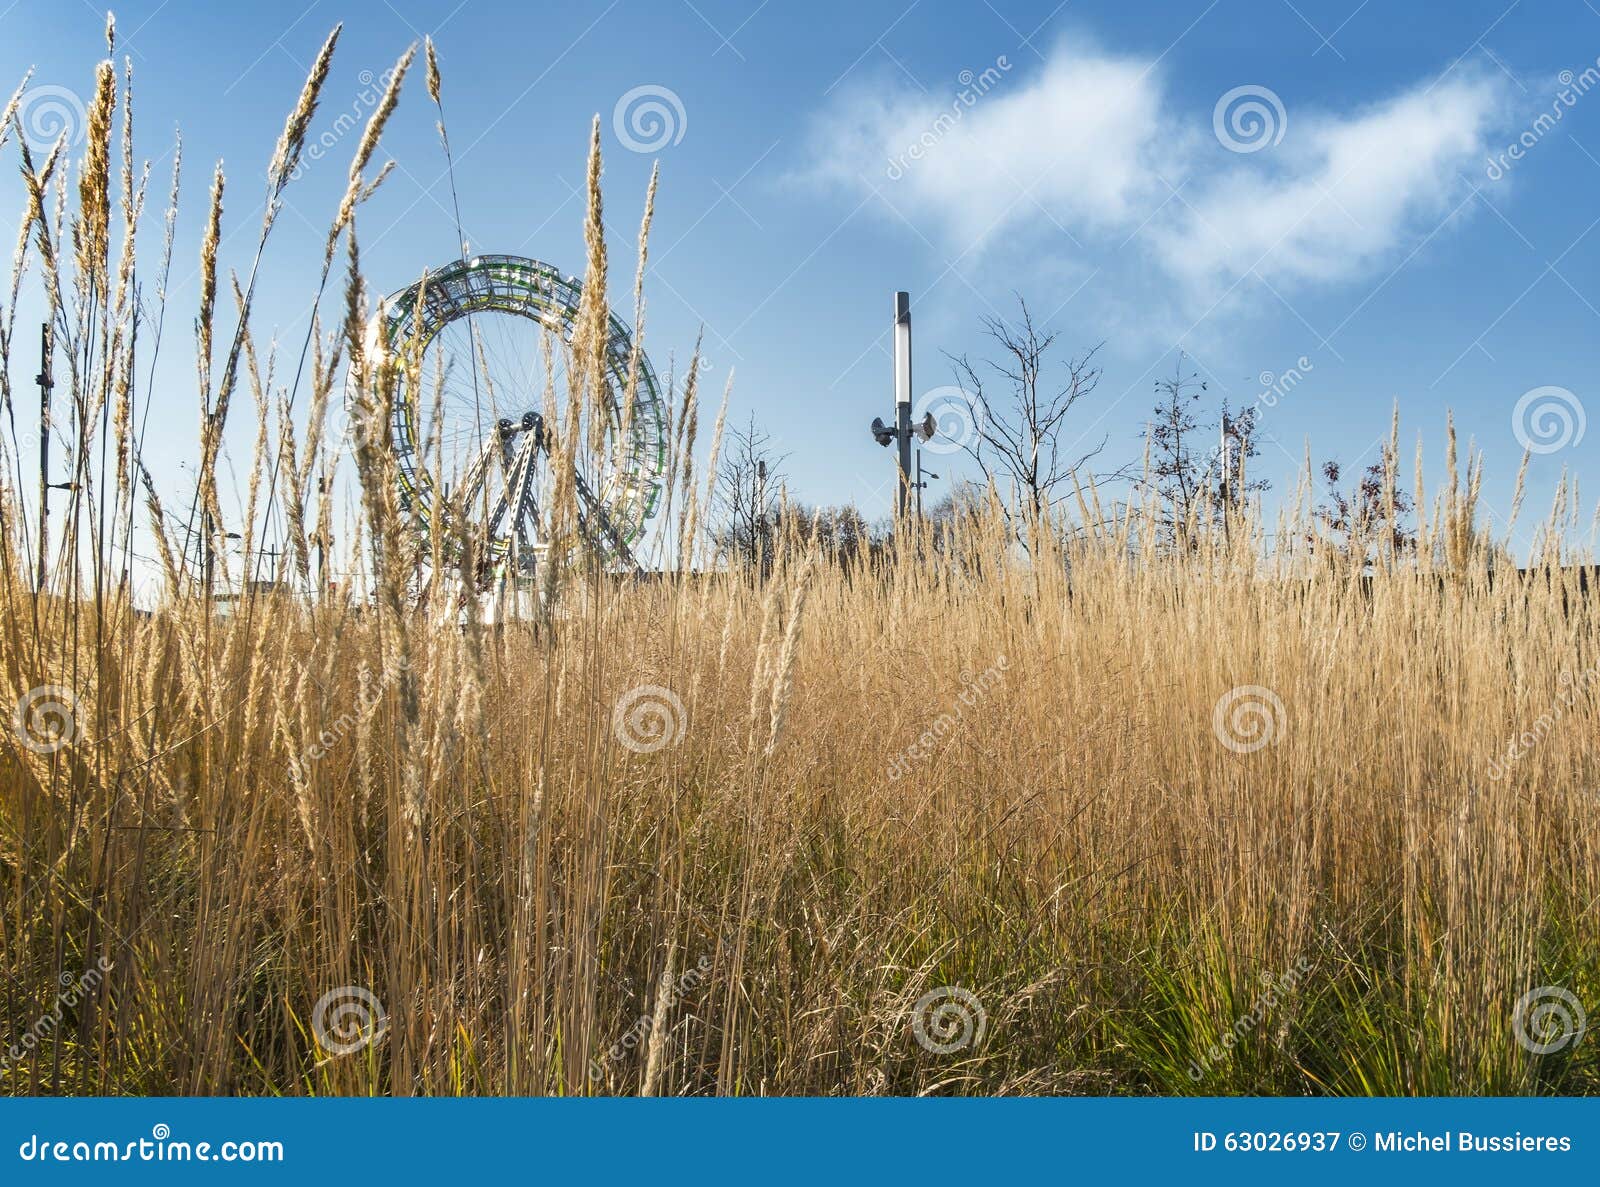 ferris wheel with herbage